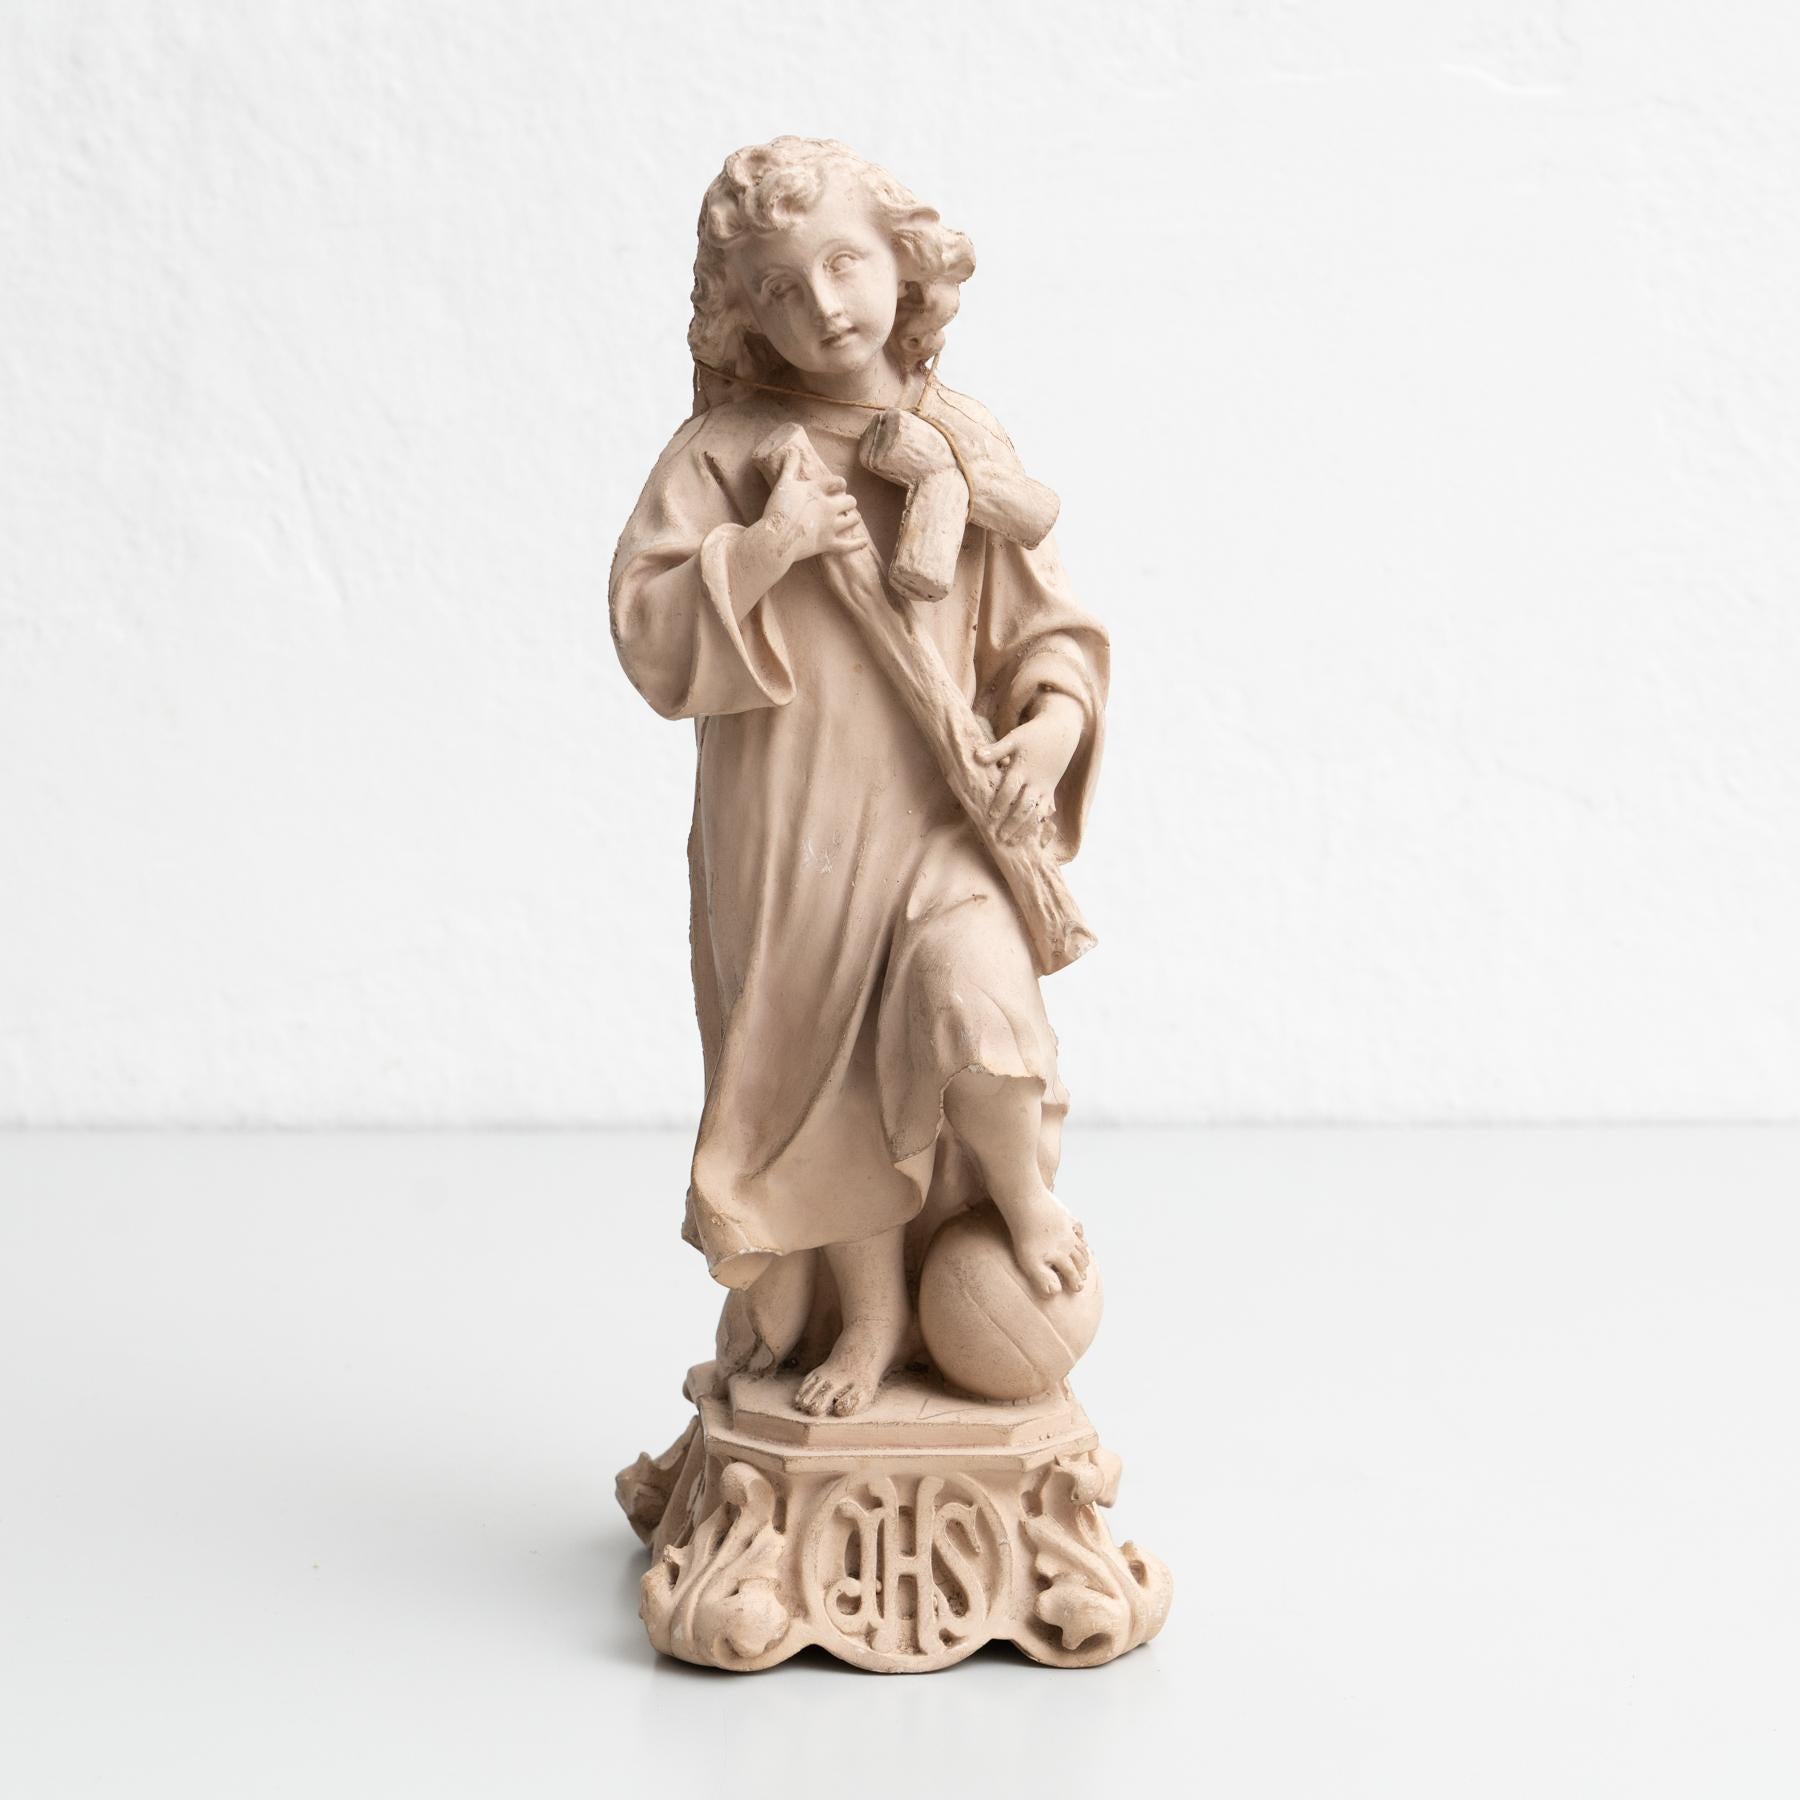 Traditional religious plaster figure of baby Jesus Christ.

Made in traditional Catalan atelier in Olot, Spain, circa 1950.

In original condition, with minor wear consistent with age and use, preserving a beautiful patina.

Materials:
Plaster.
    